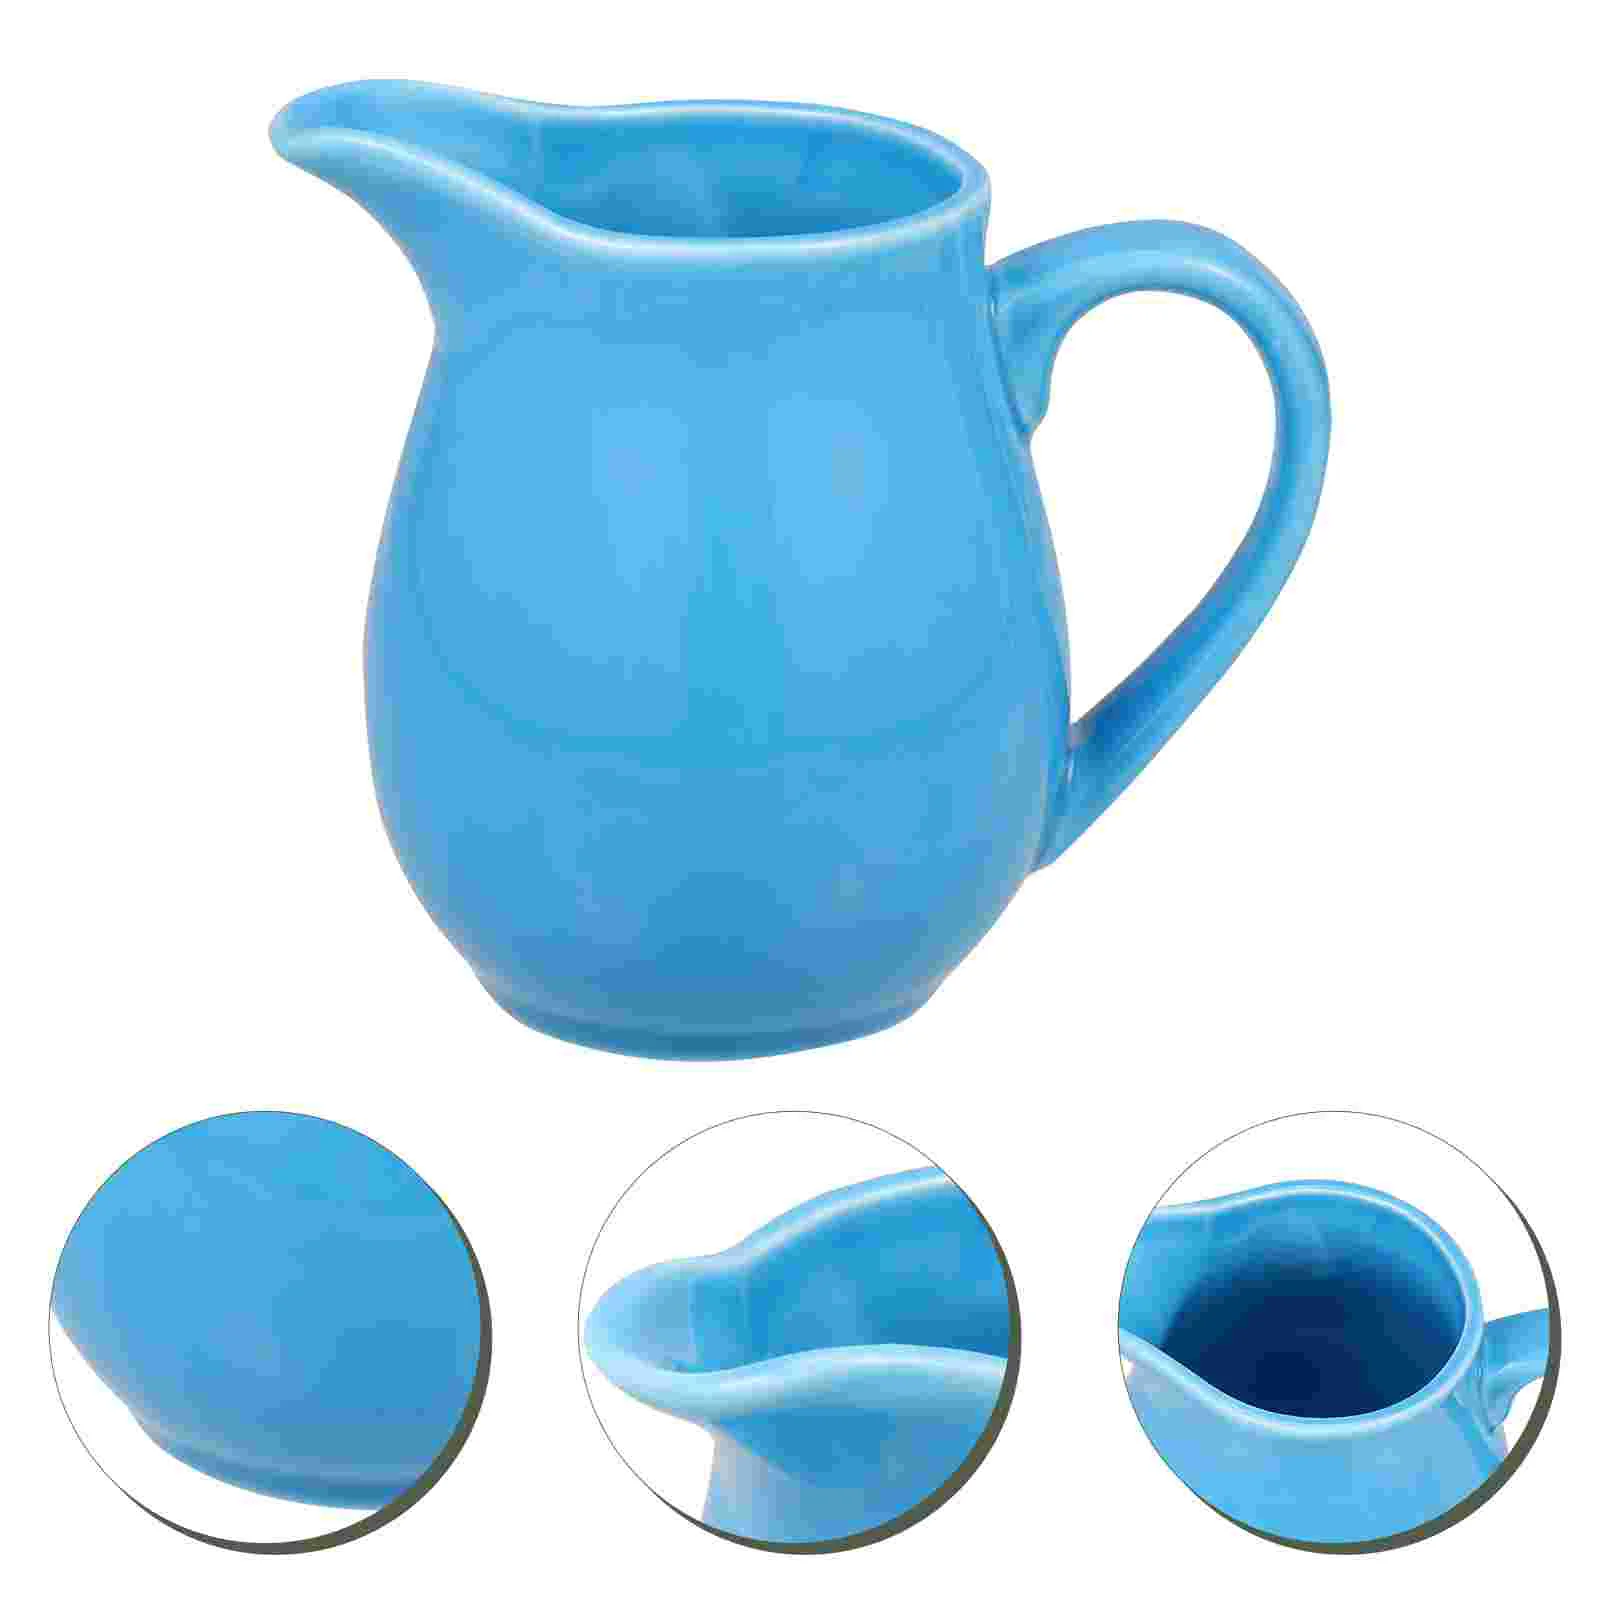 

Pitcher Creamer Jug Ceramic Coffee Sauce Cup Frothing Gravy Mini Pourer Serving Boatpour Creamdish Porcelain Bowl Cups Syrup